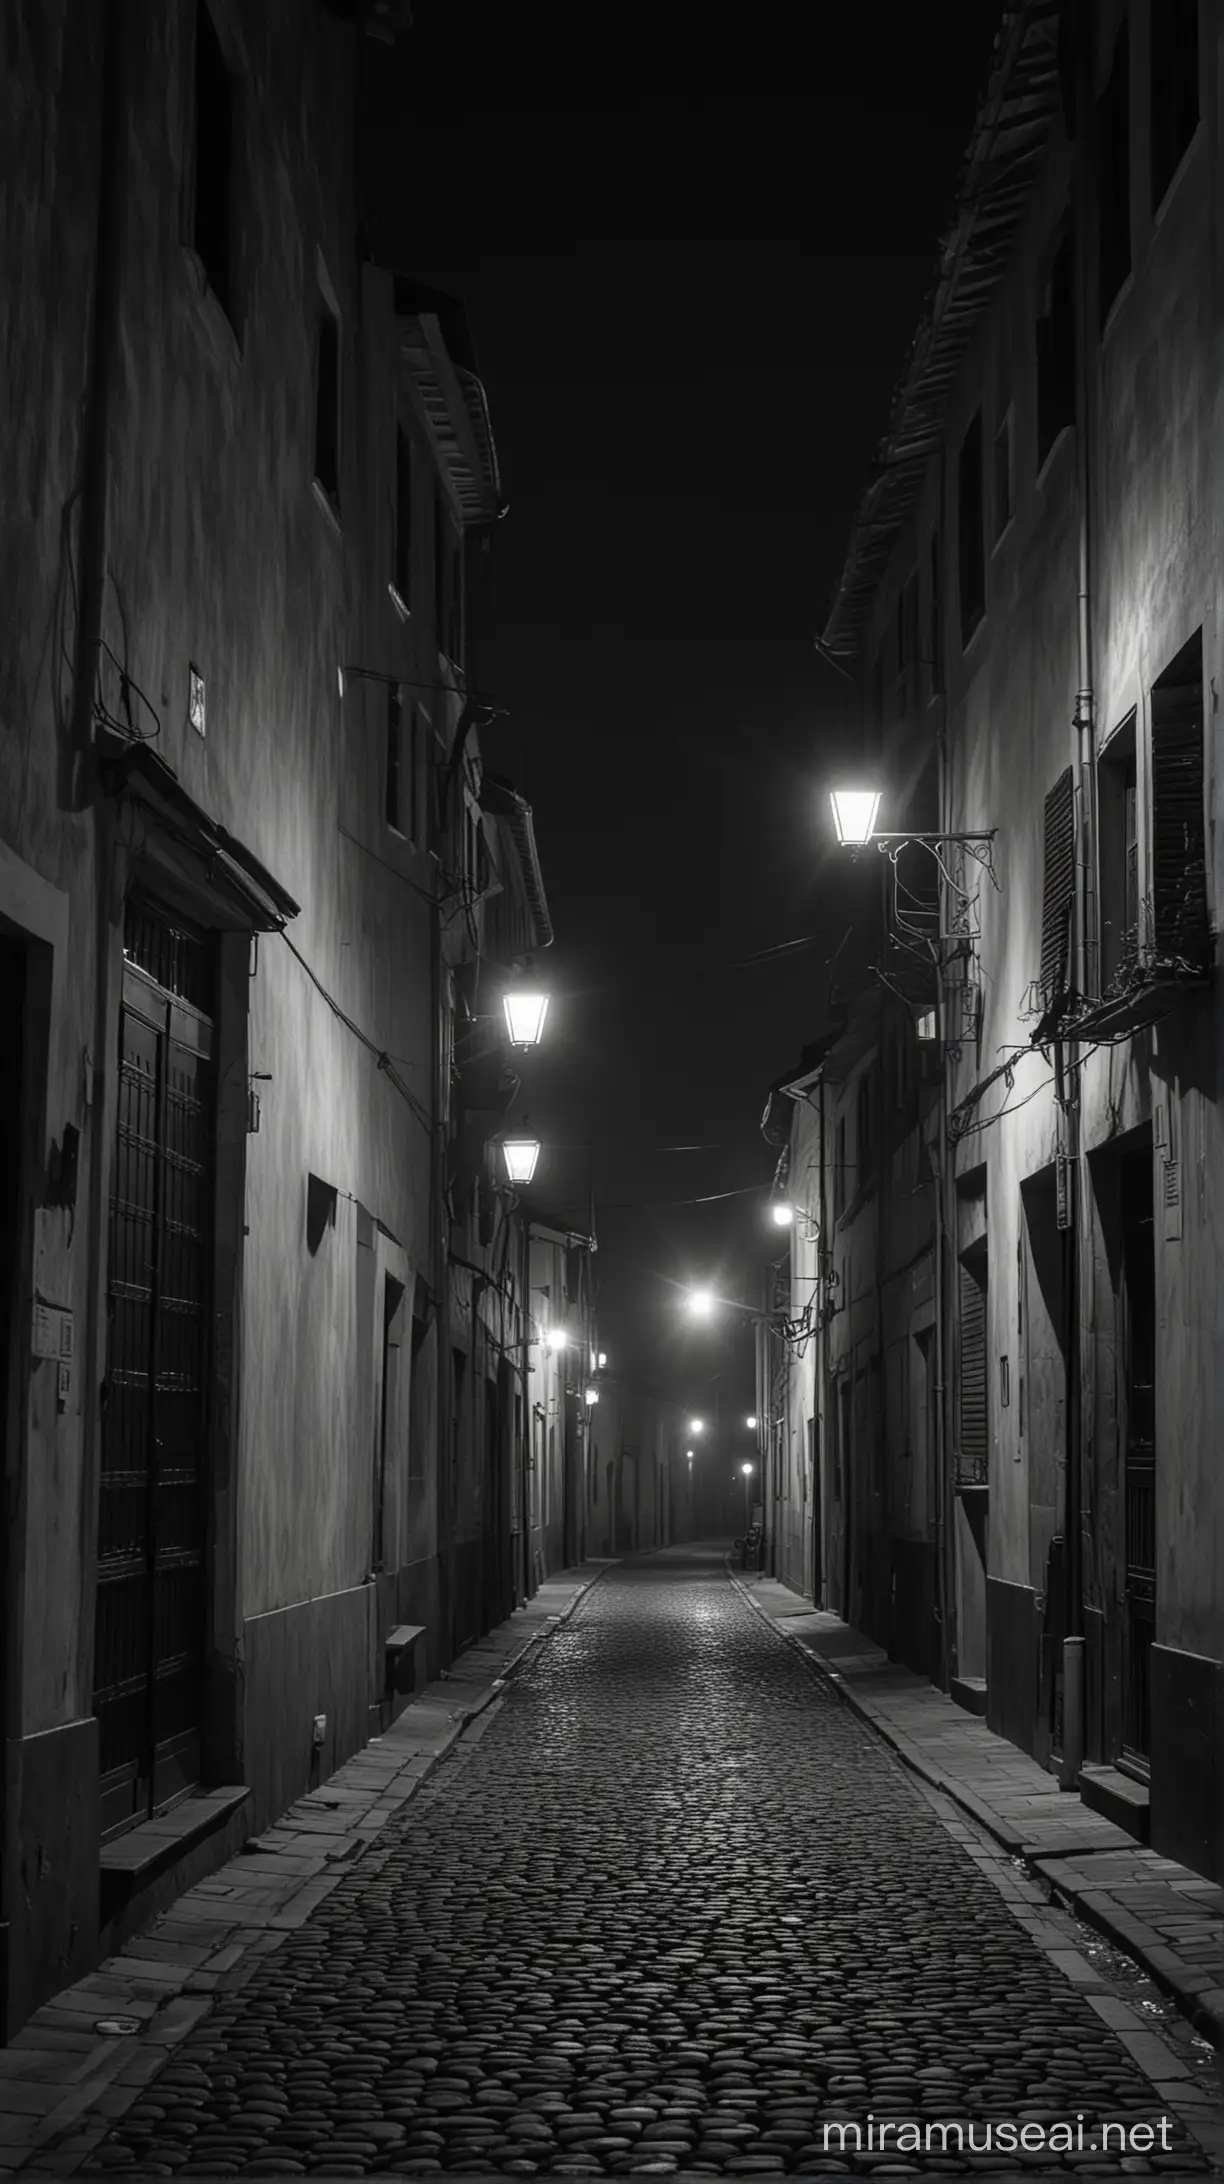 The Silent Streets of the Town: Empty and quiet streets stretch under the dim lights of the street lamps during the night. The curtains of the houses sway gently, while the mysterious atmosphere of the town is palpable.

